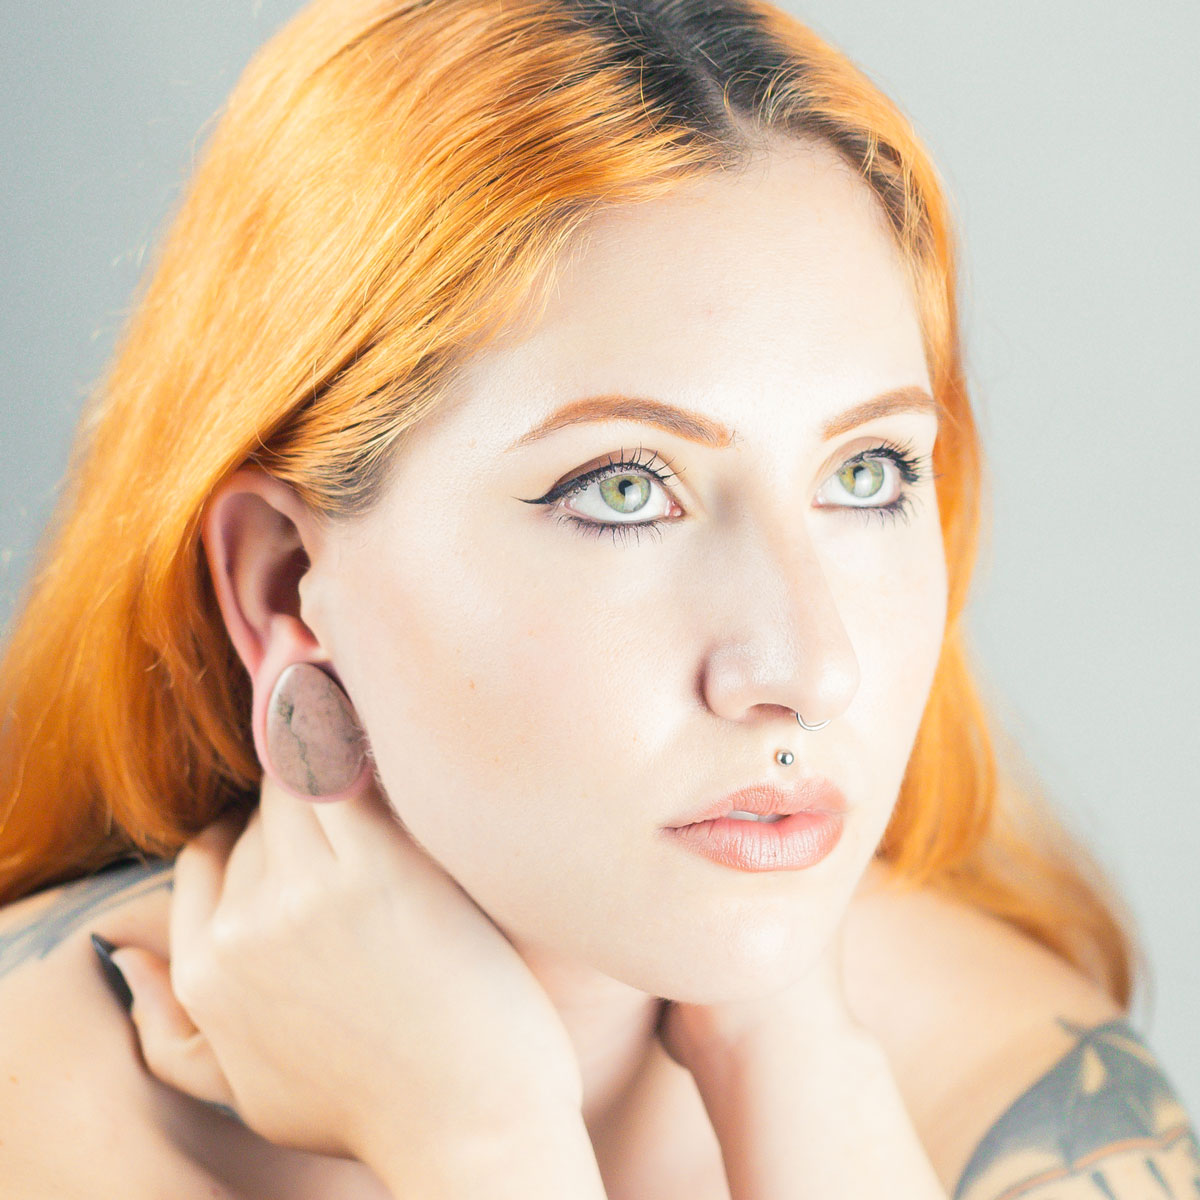 Teardrop Plug Model with Stretched Ears